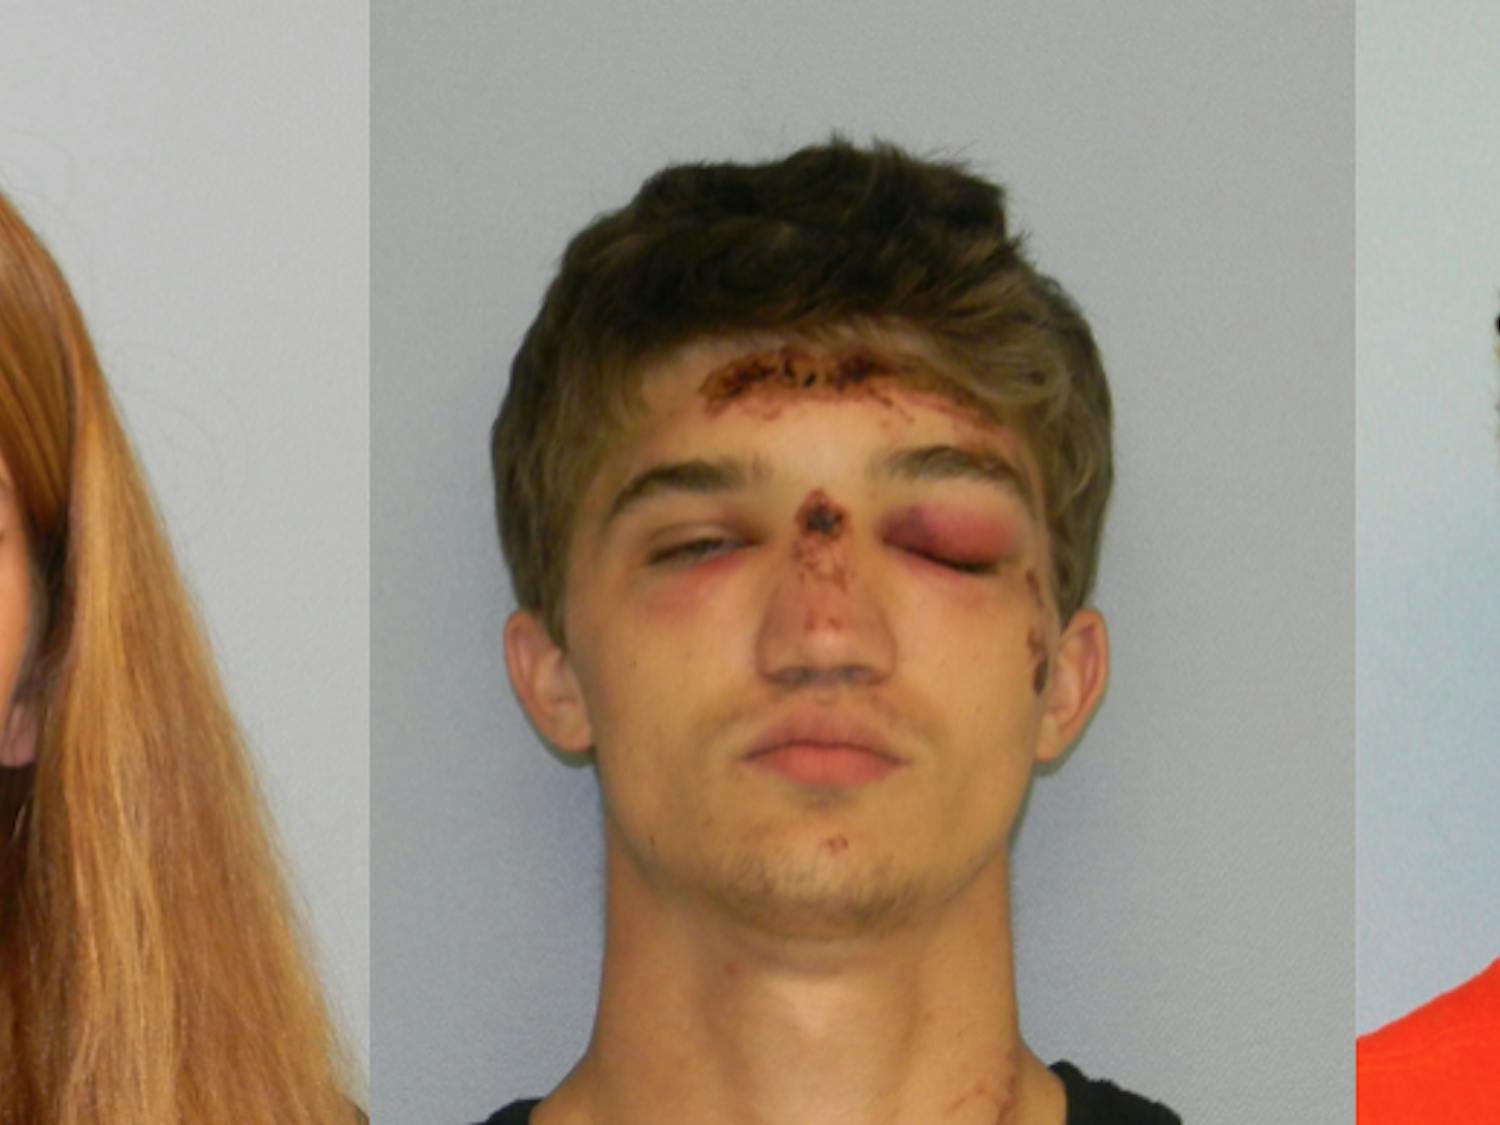 Suspects arrested for theft, breaking and entering